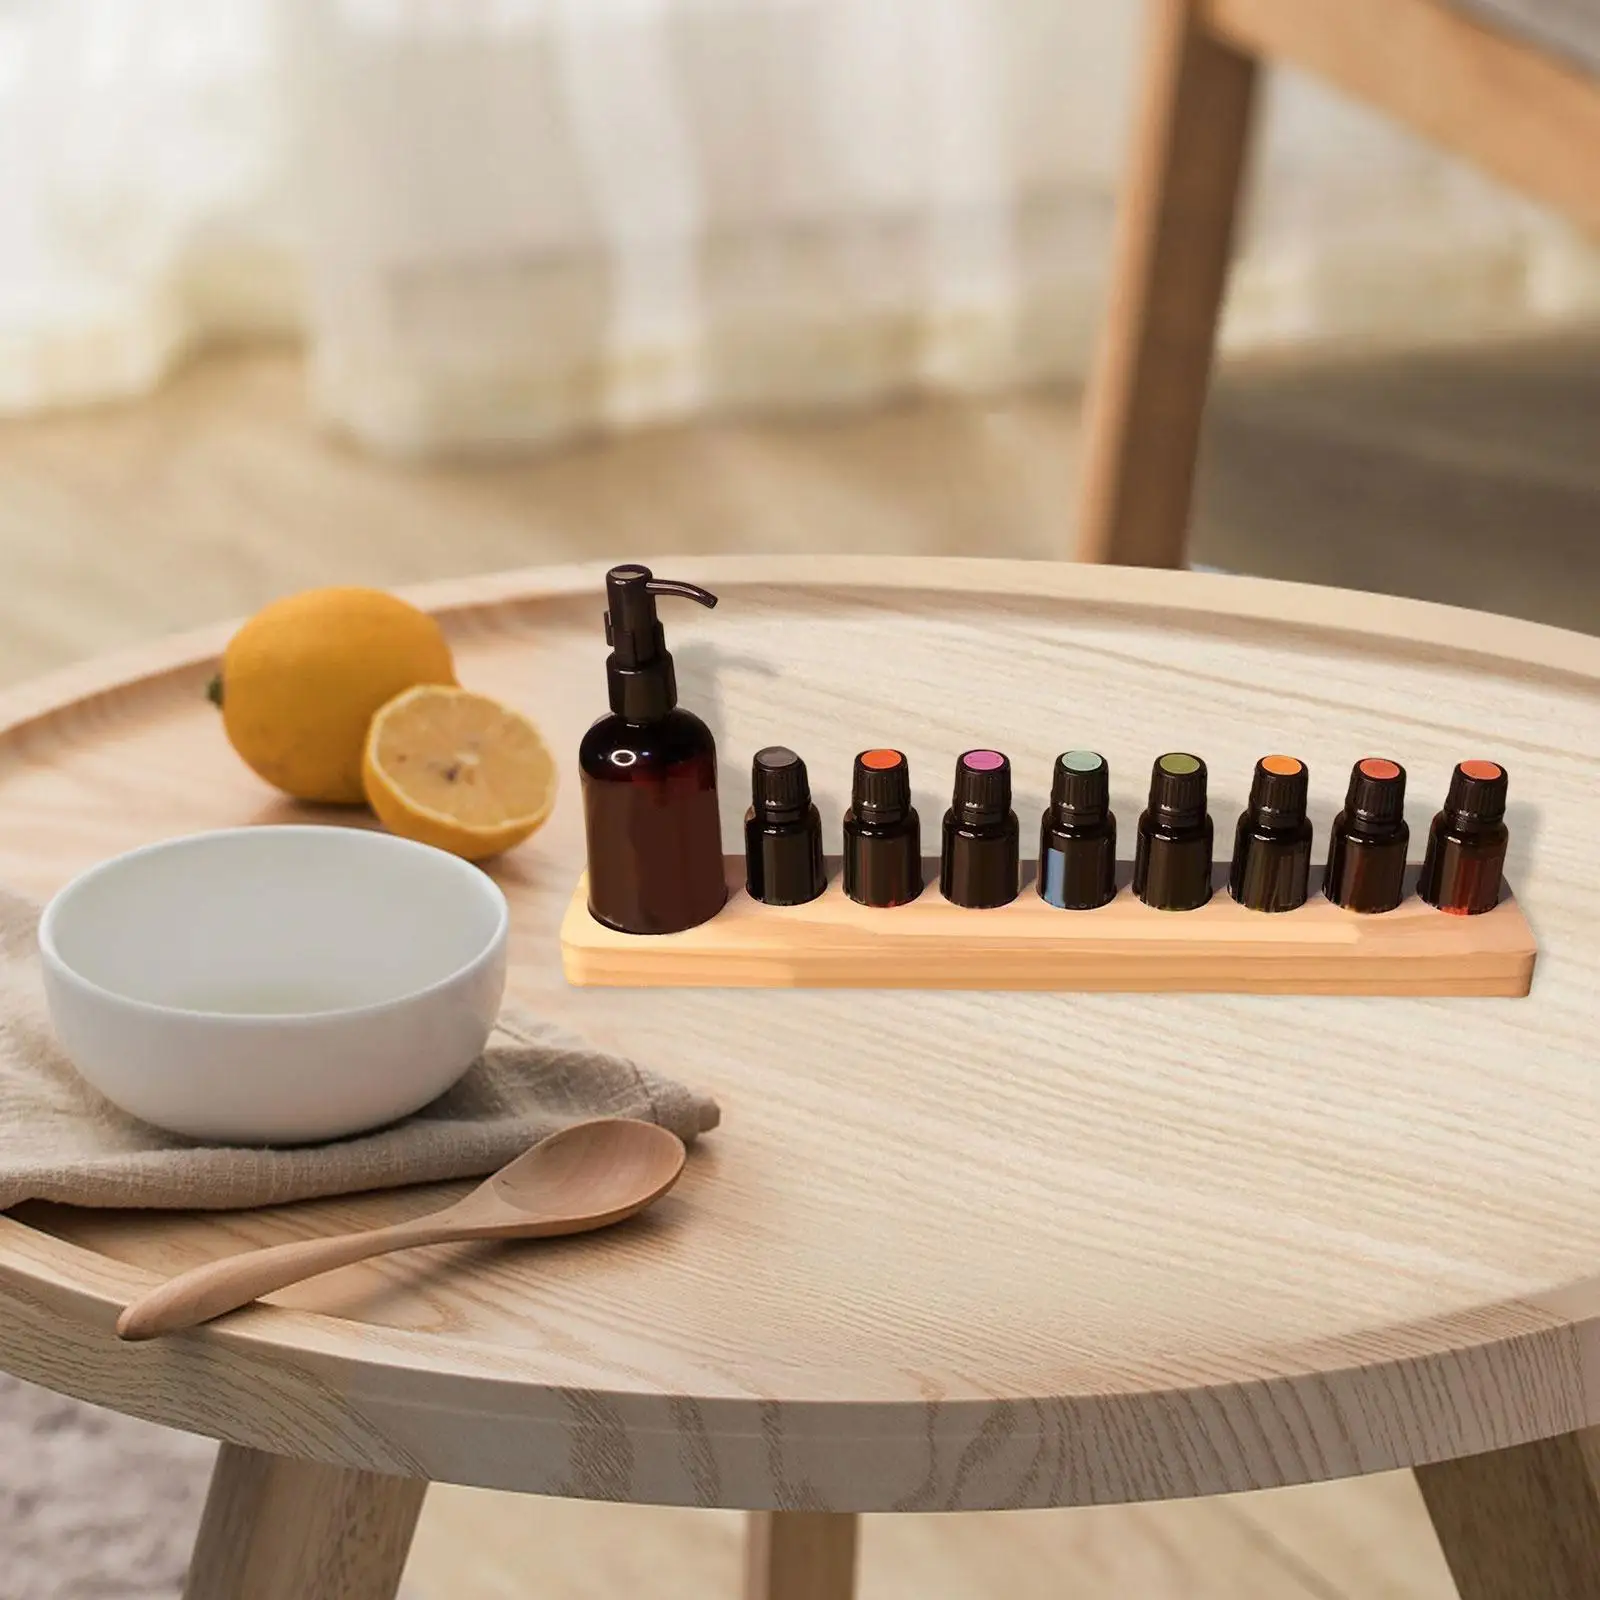 9 Hole Essential Oils Bottle Holder Desktop Makeup Display Stand for 5/10/15/115ml Bottles Wooden Container Perfume Storage Tray